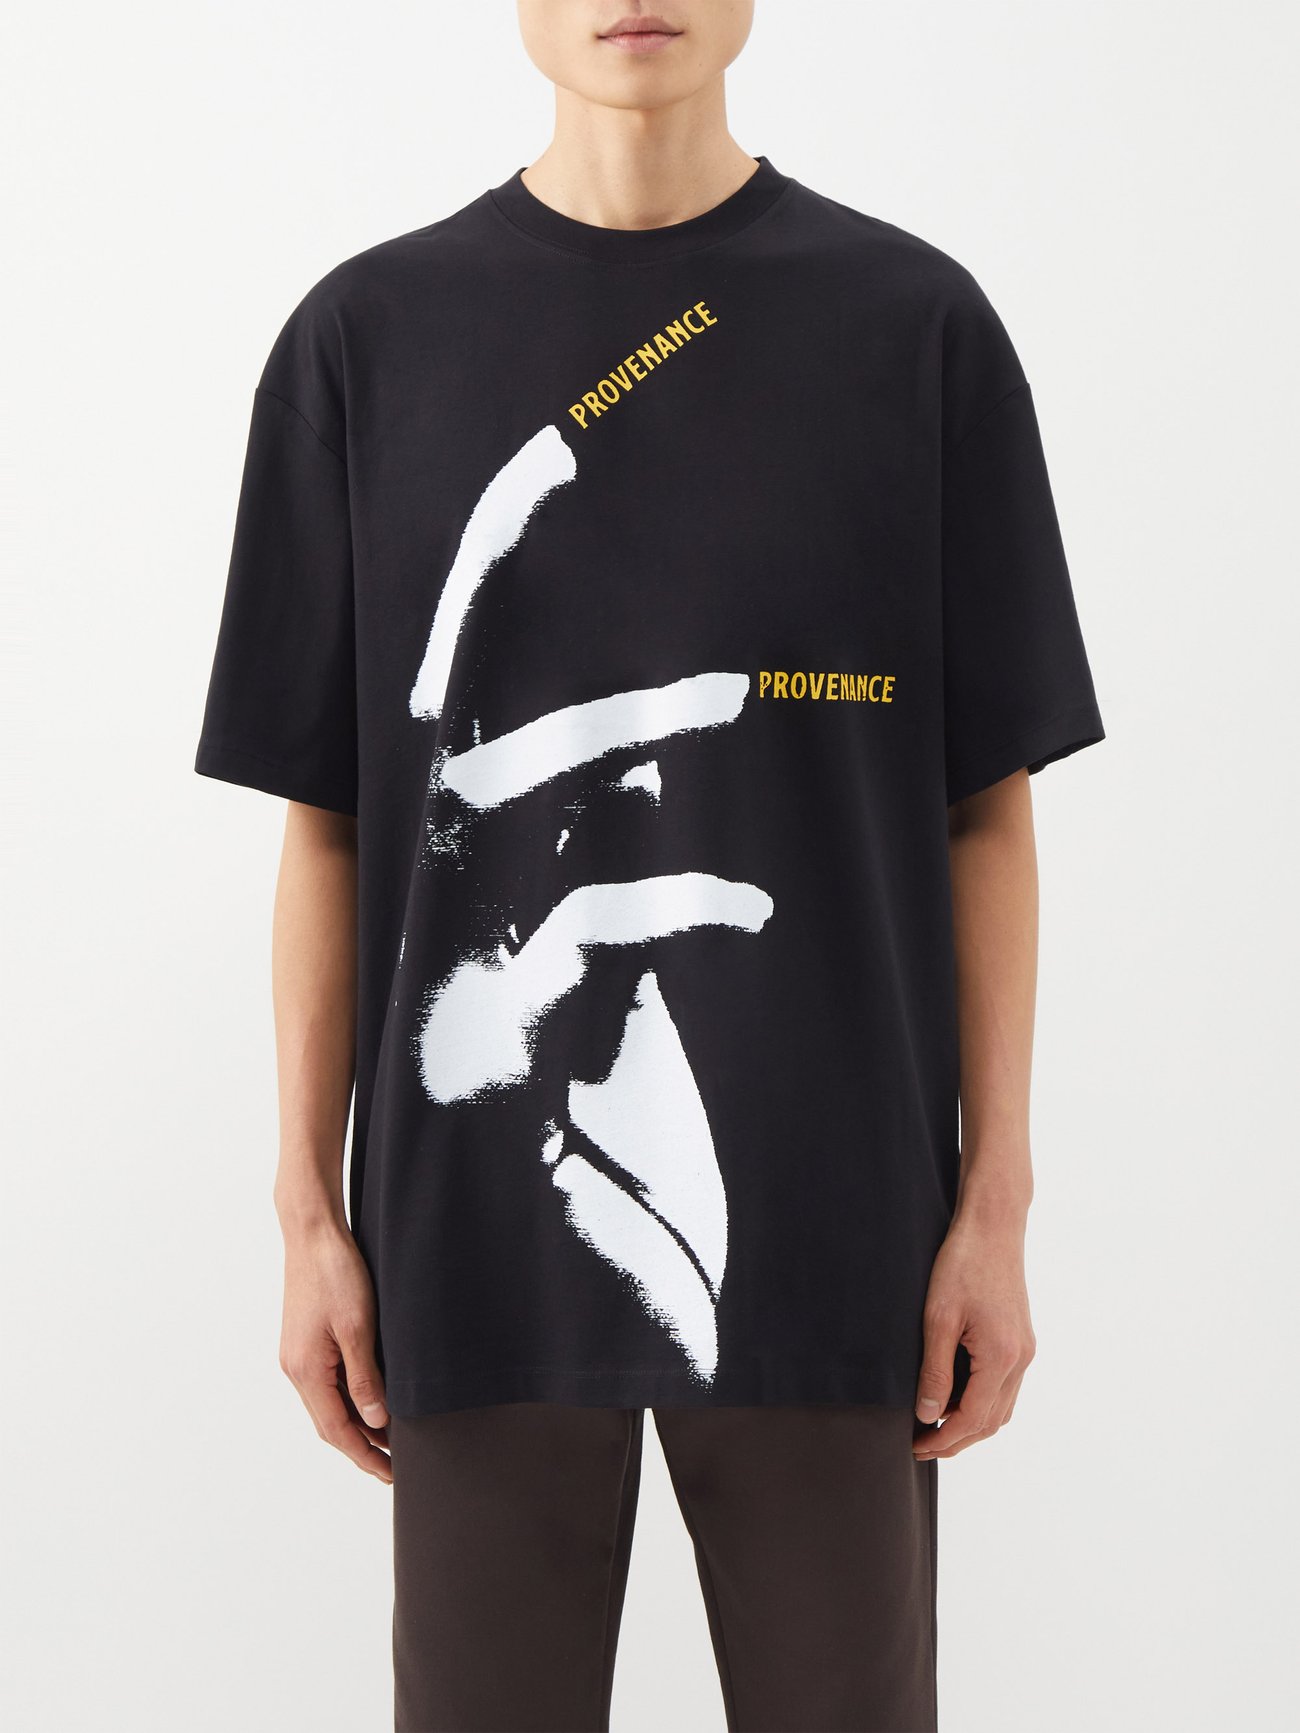 RAF SIMONS 18ss ハングルツアー Tシャツ | www.trevires.be